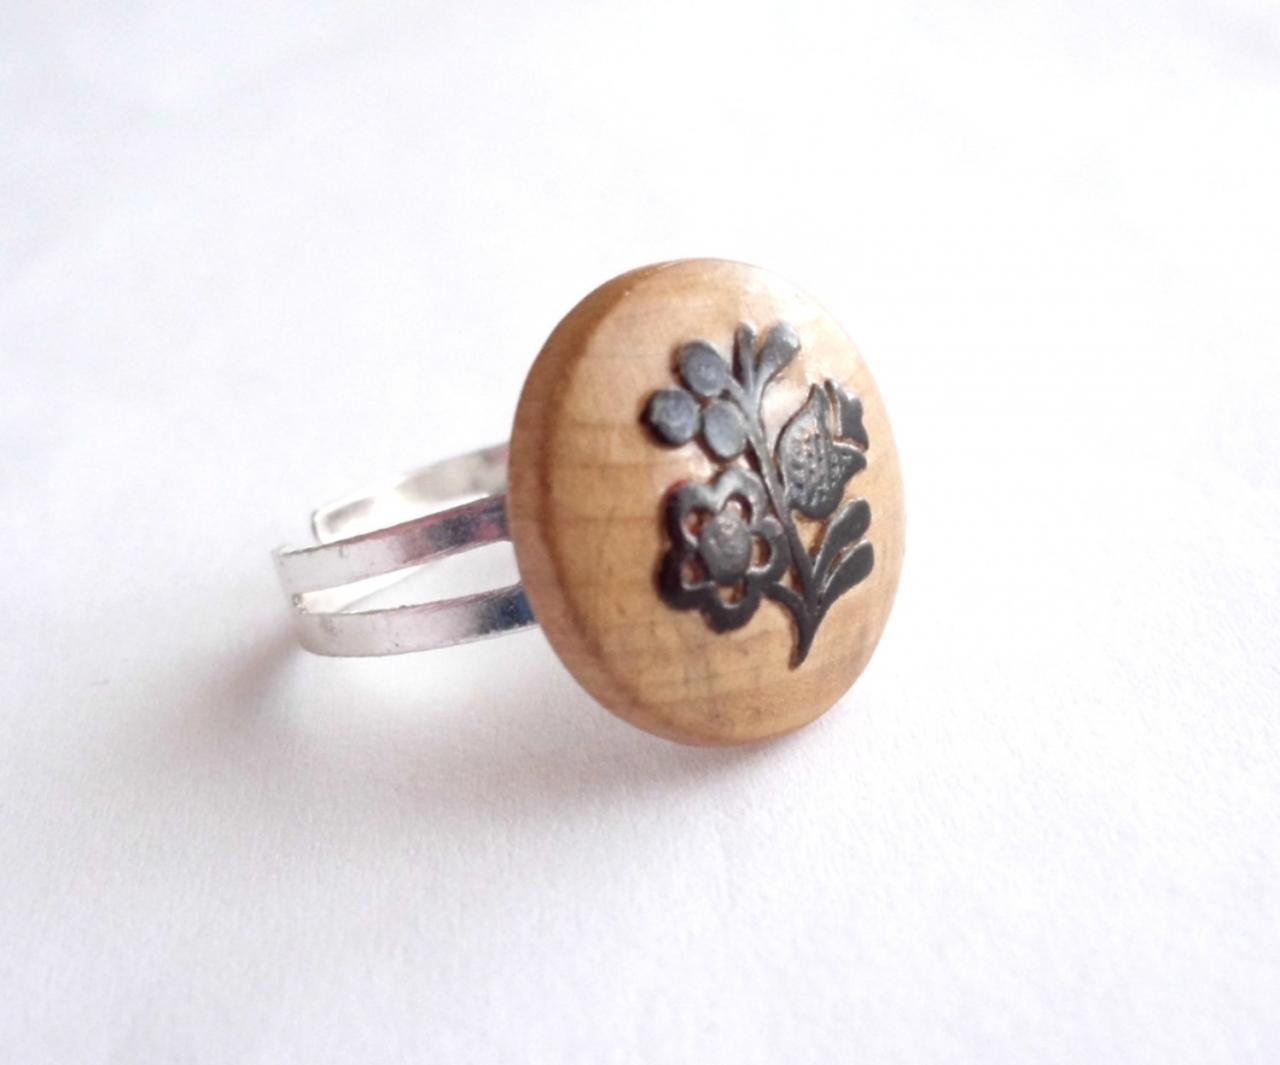 Wooden Adjustable Ring Made Of Recycled Vintage Button With Flower Pattern - Upcycled Jewelry, Natural, Rustic, Eco-friendly, Folk